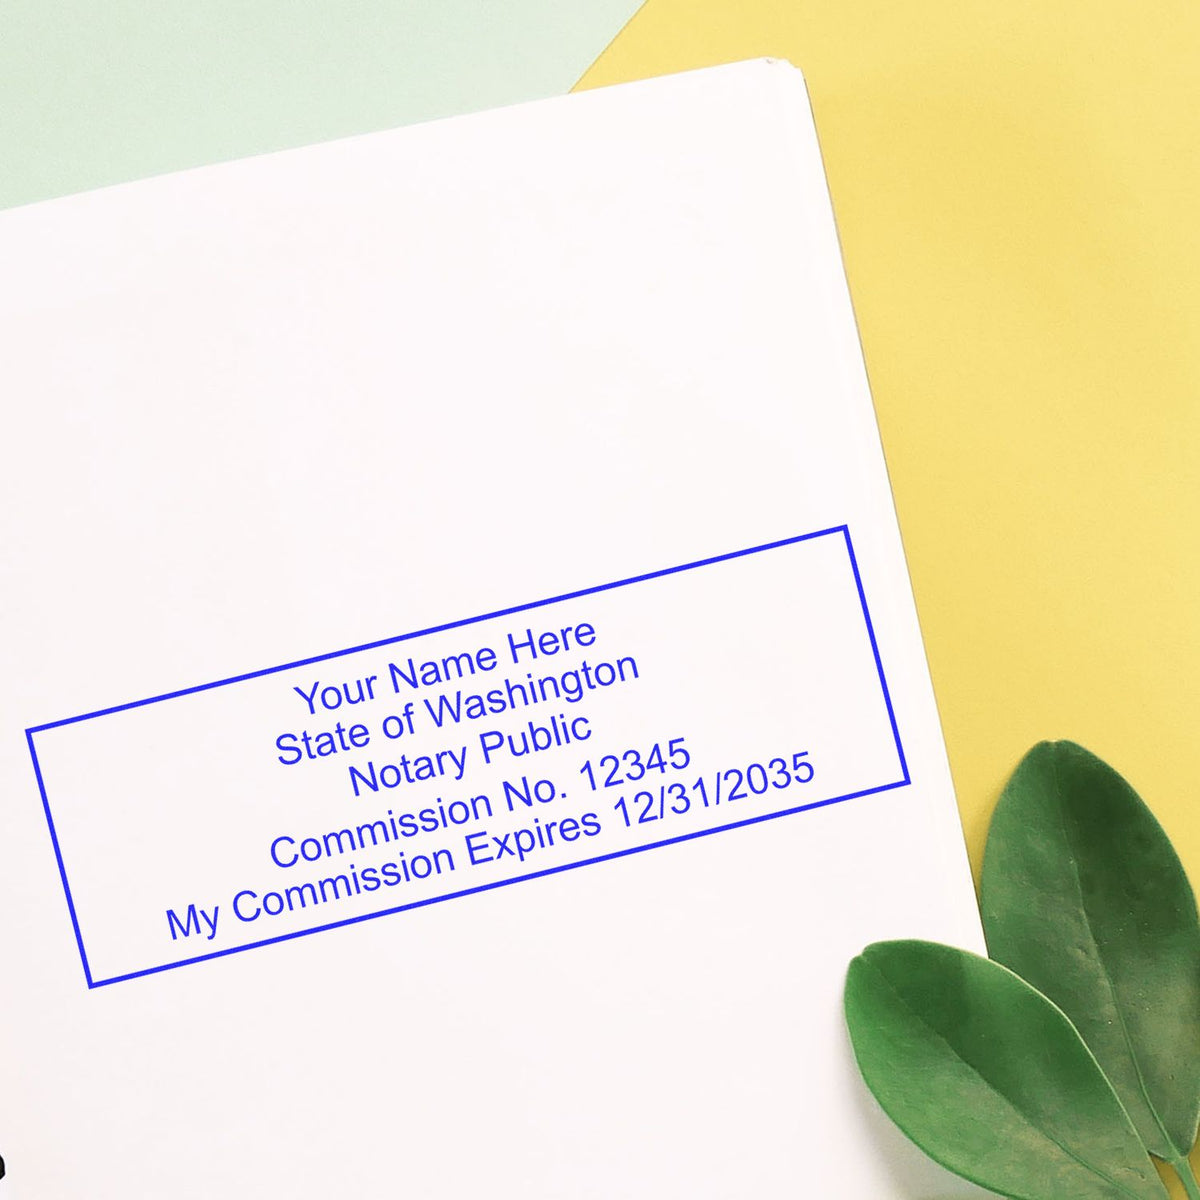 This paper is stamped with a sample imprint of the Slim Pre-Inked Rectangular Notary Stamp for Washington, signifying its quality and reliability.